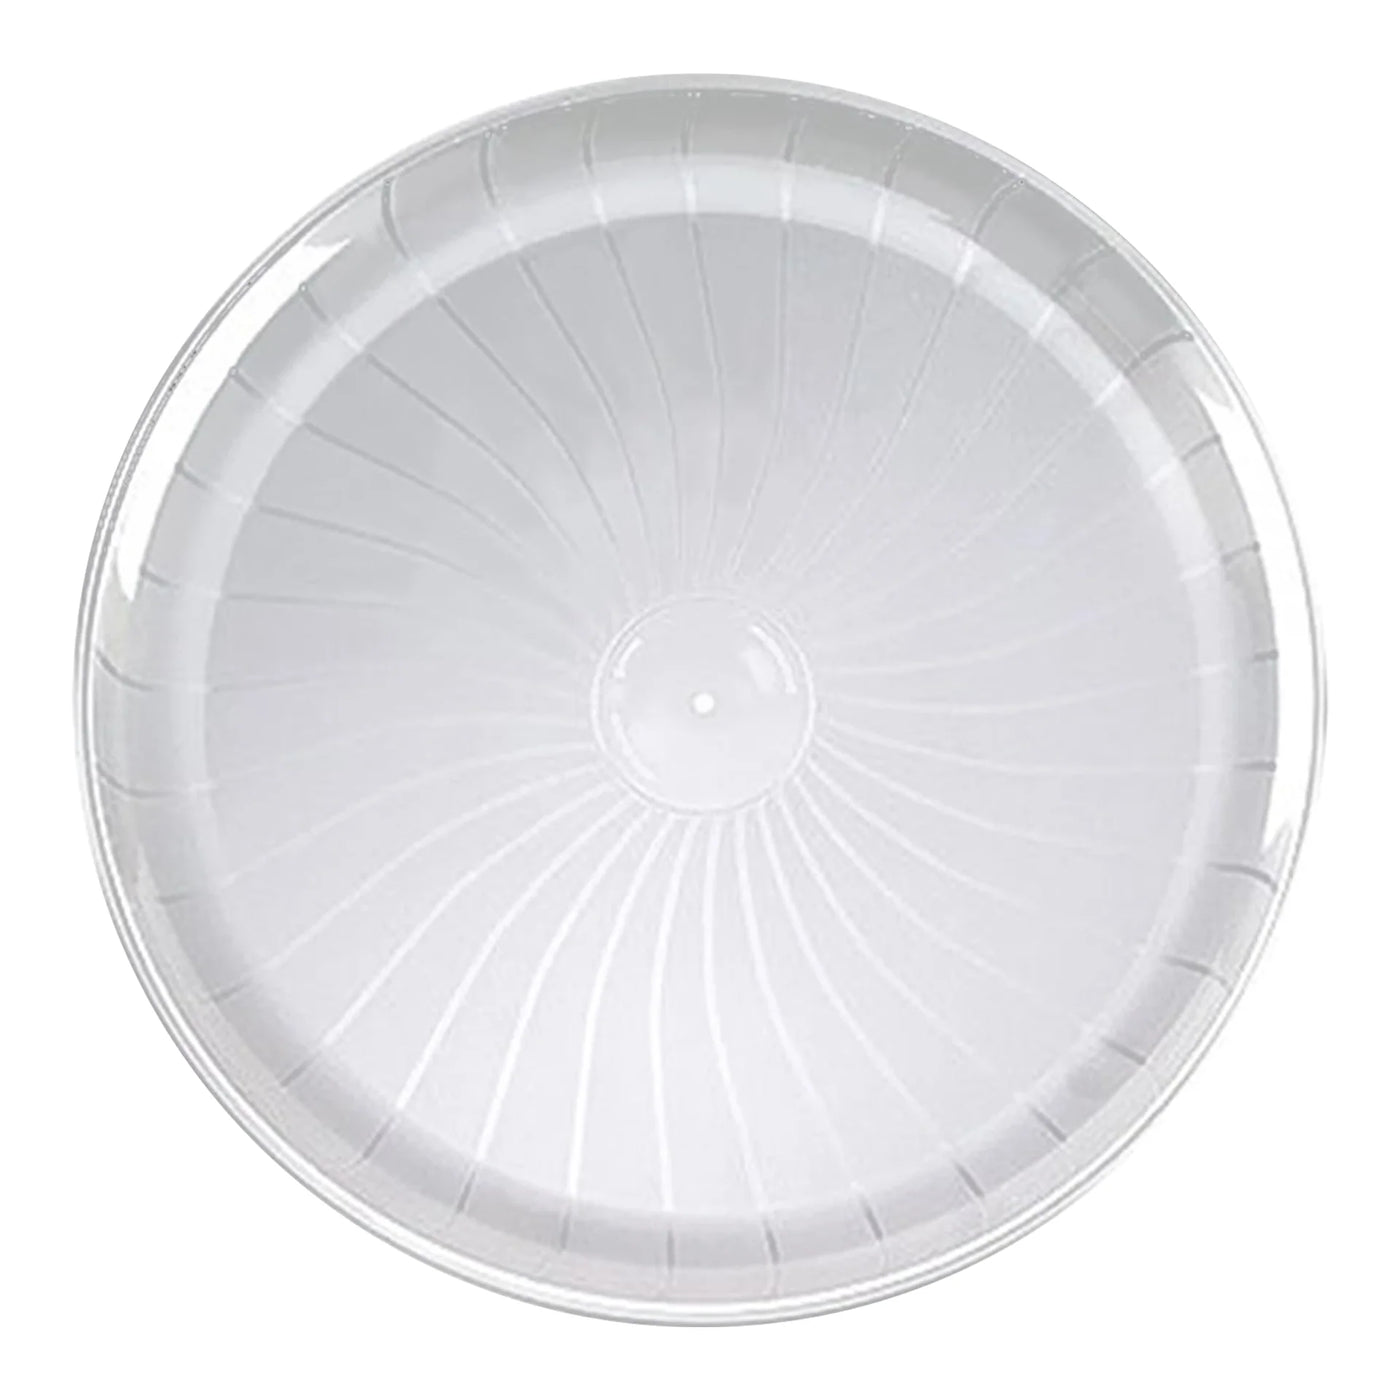 14" Clear Pavilion Round Disposable Plastic Tray (2 Count) - Set With Style